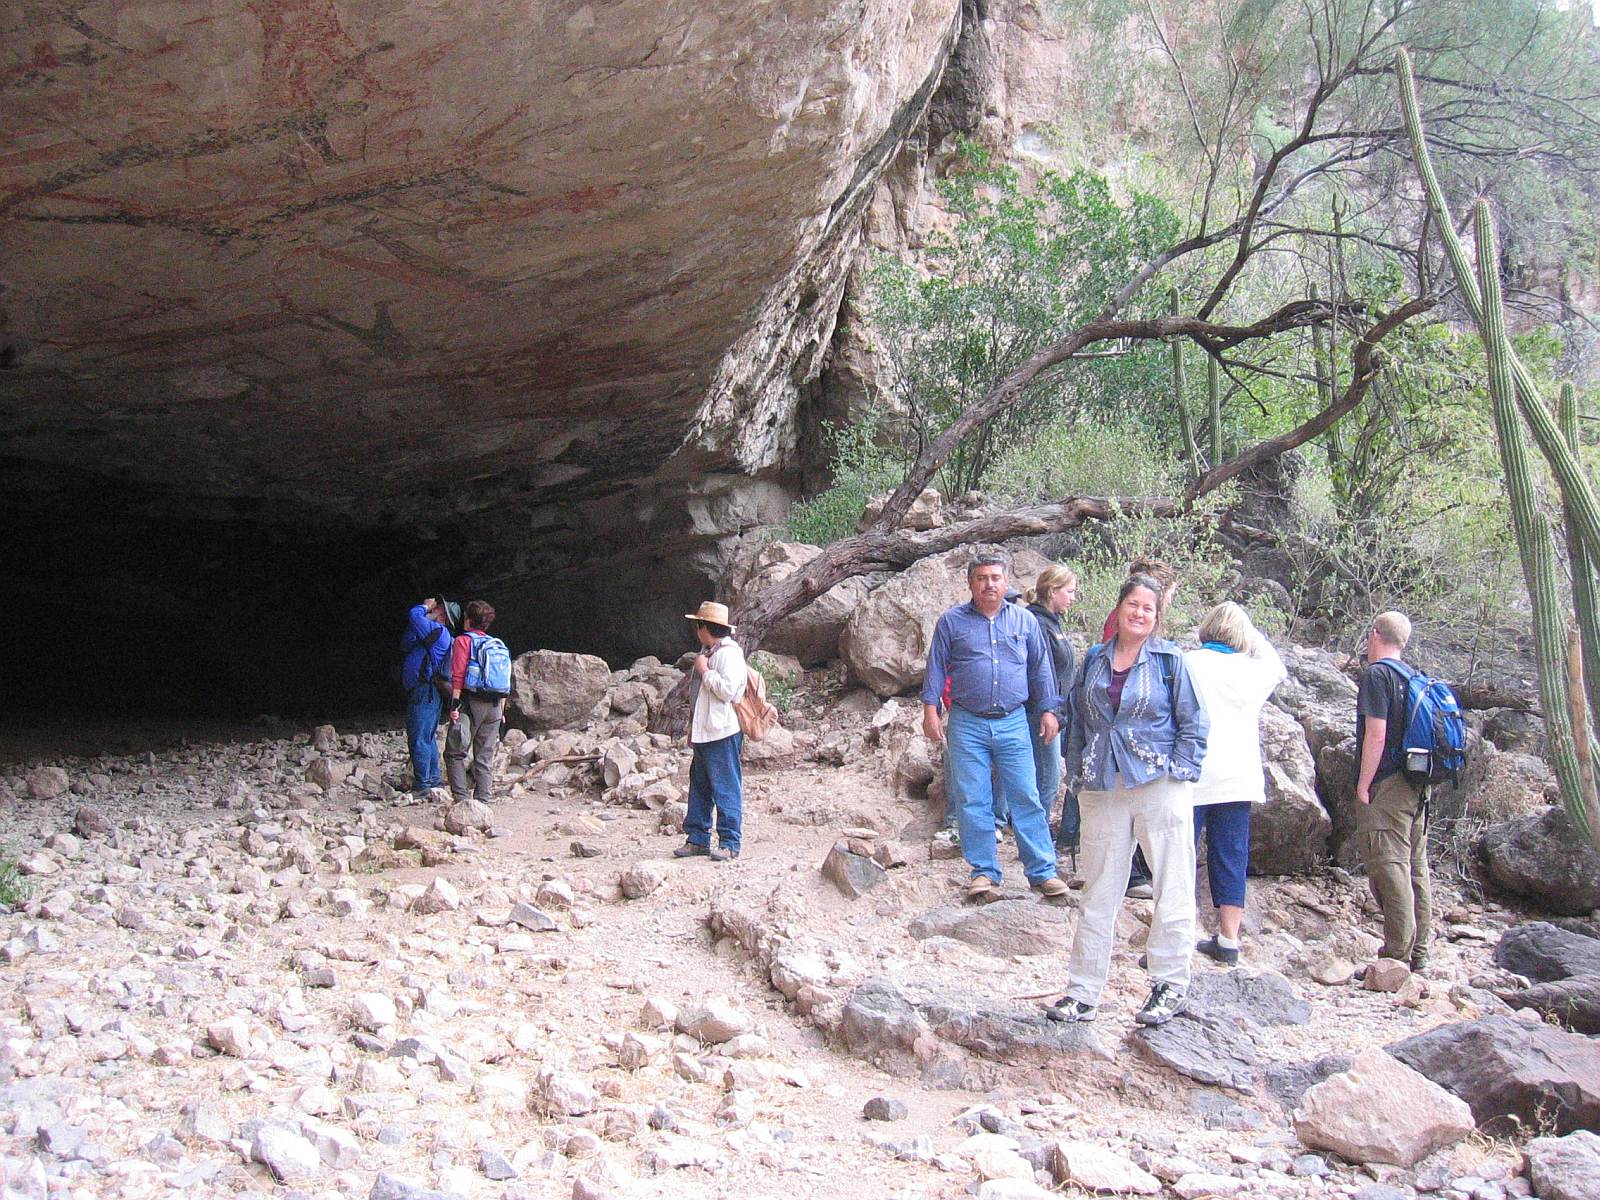 Sheila and I first visited Cueva San Borjitas in 2004.  Our guide Salvador Castro Drew is behind Sheila to the left.